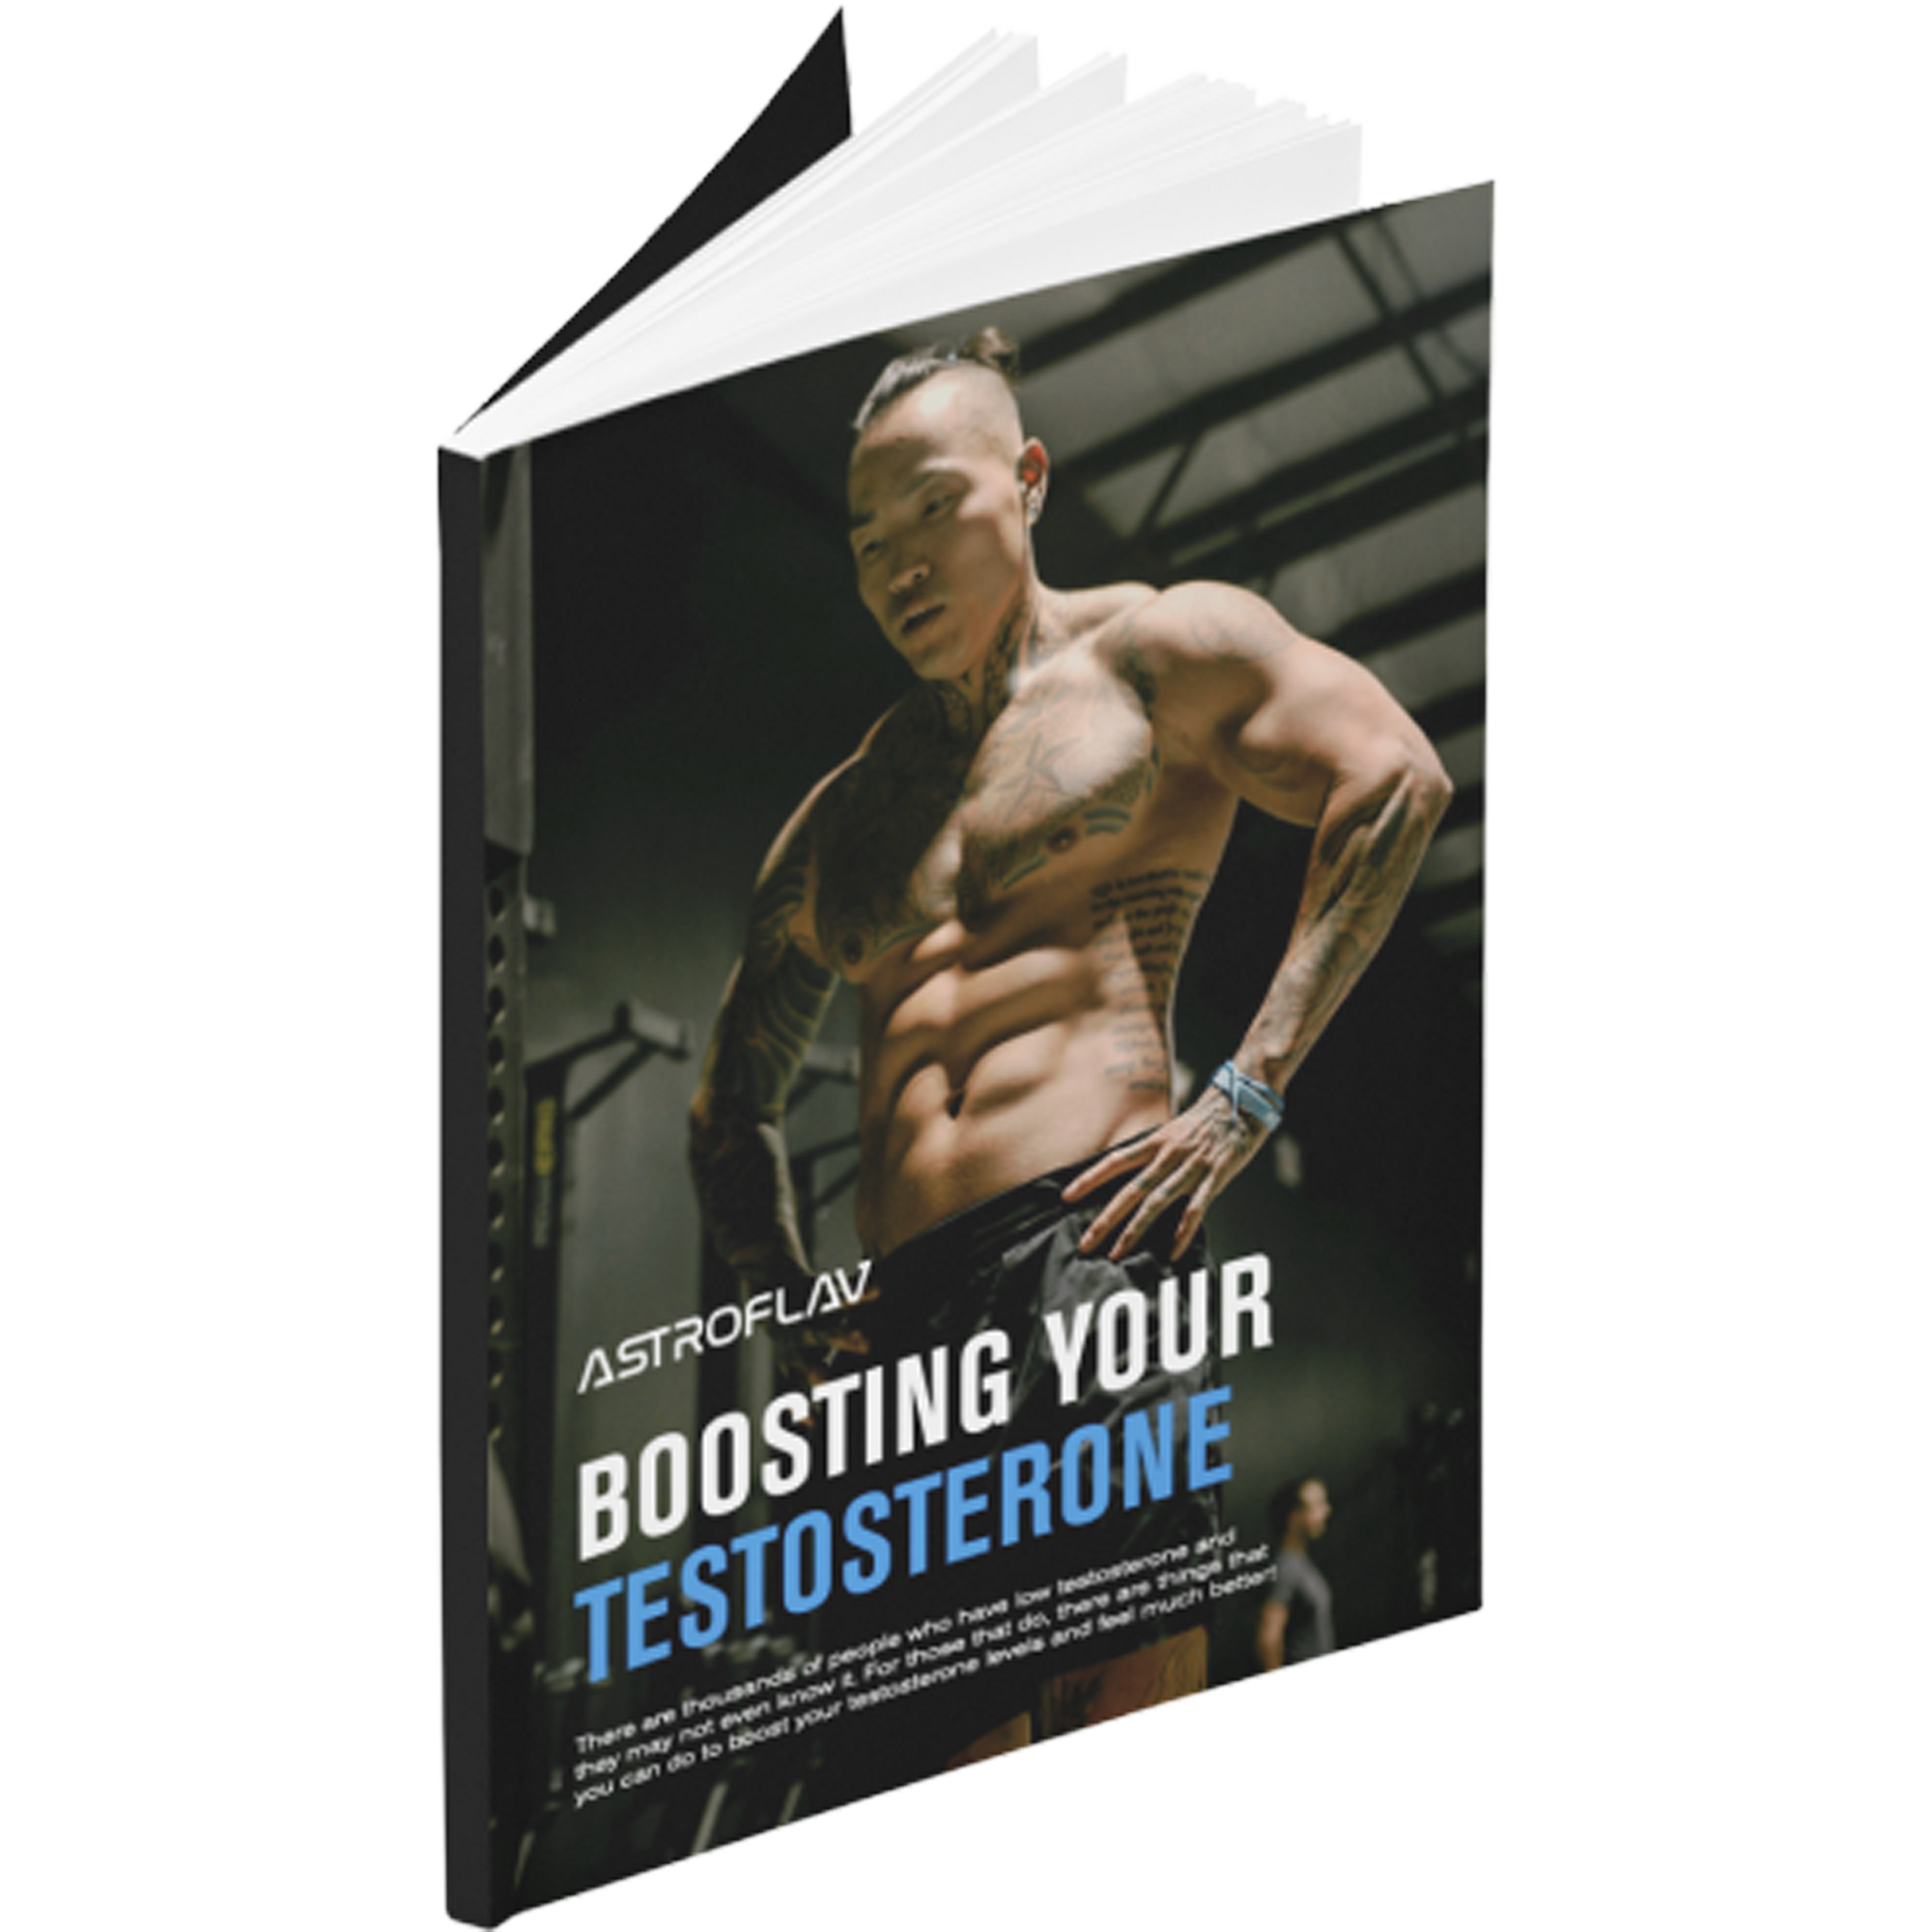 FREE: Boosting Your Testosterone Playbook